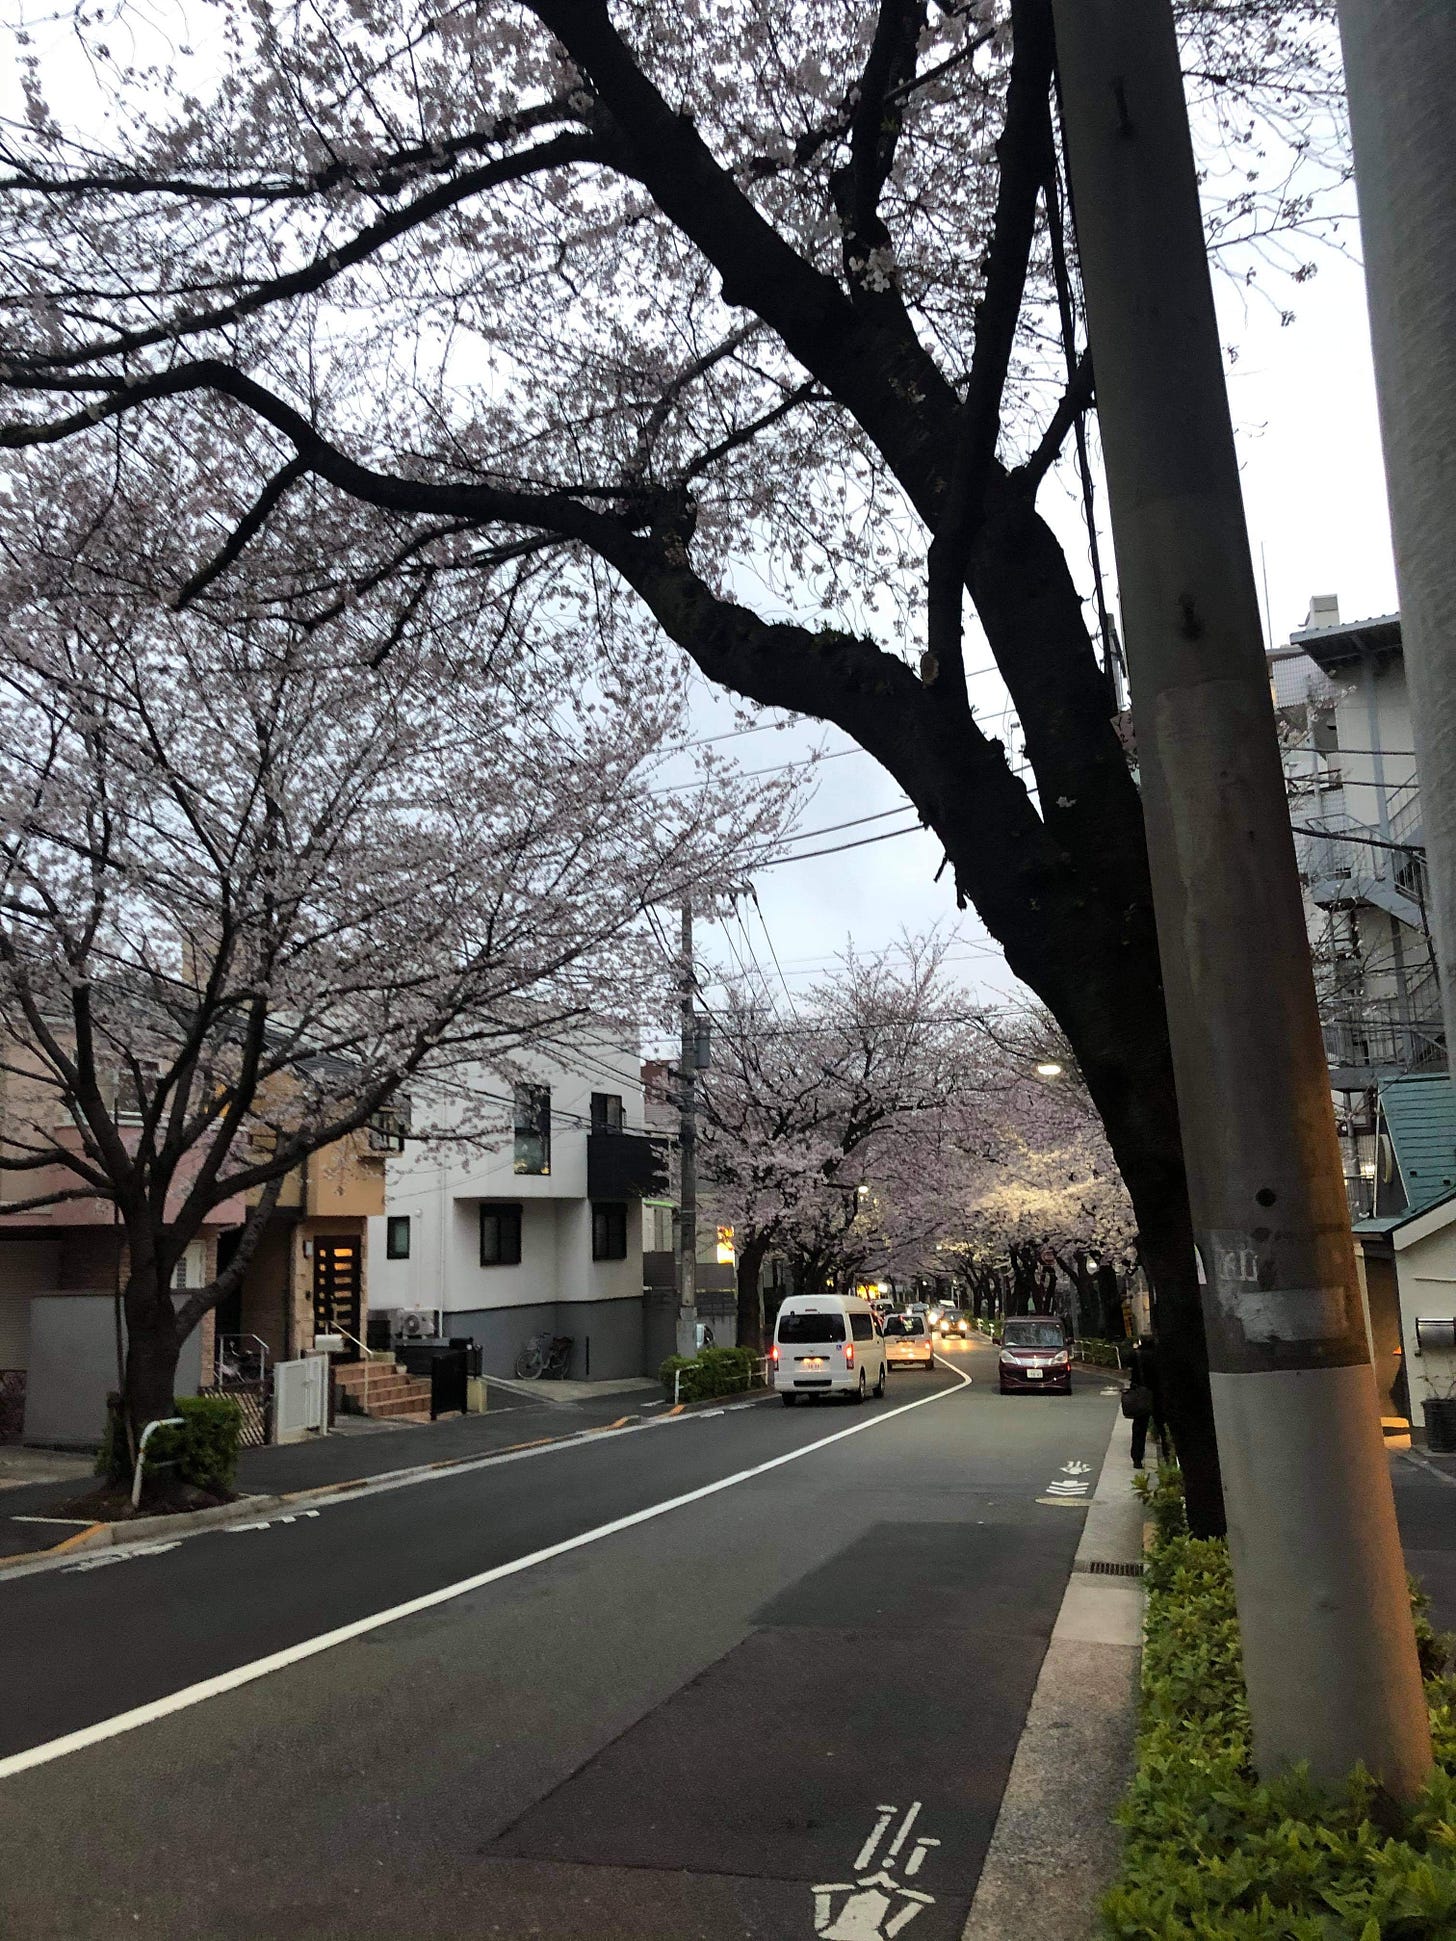 Street in Tokyo with cherry blossoms in evening